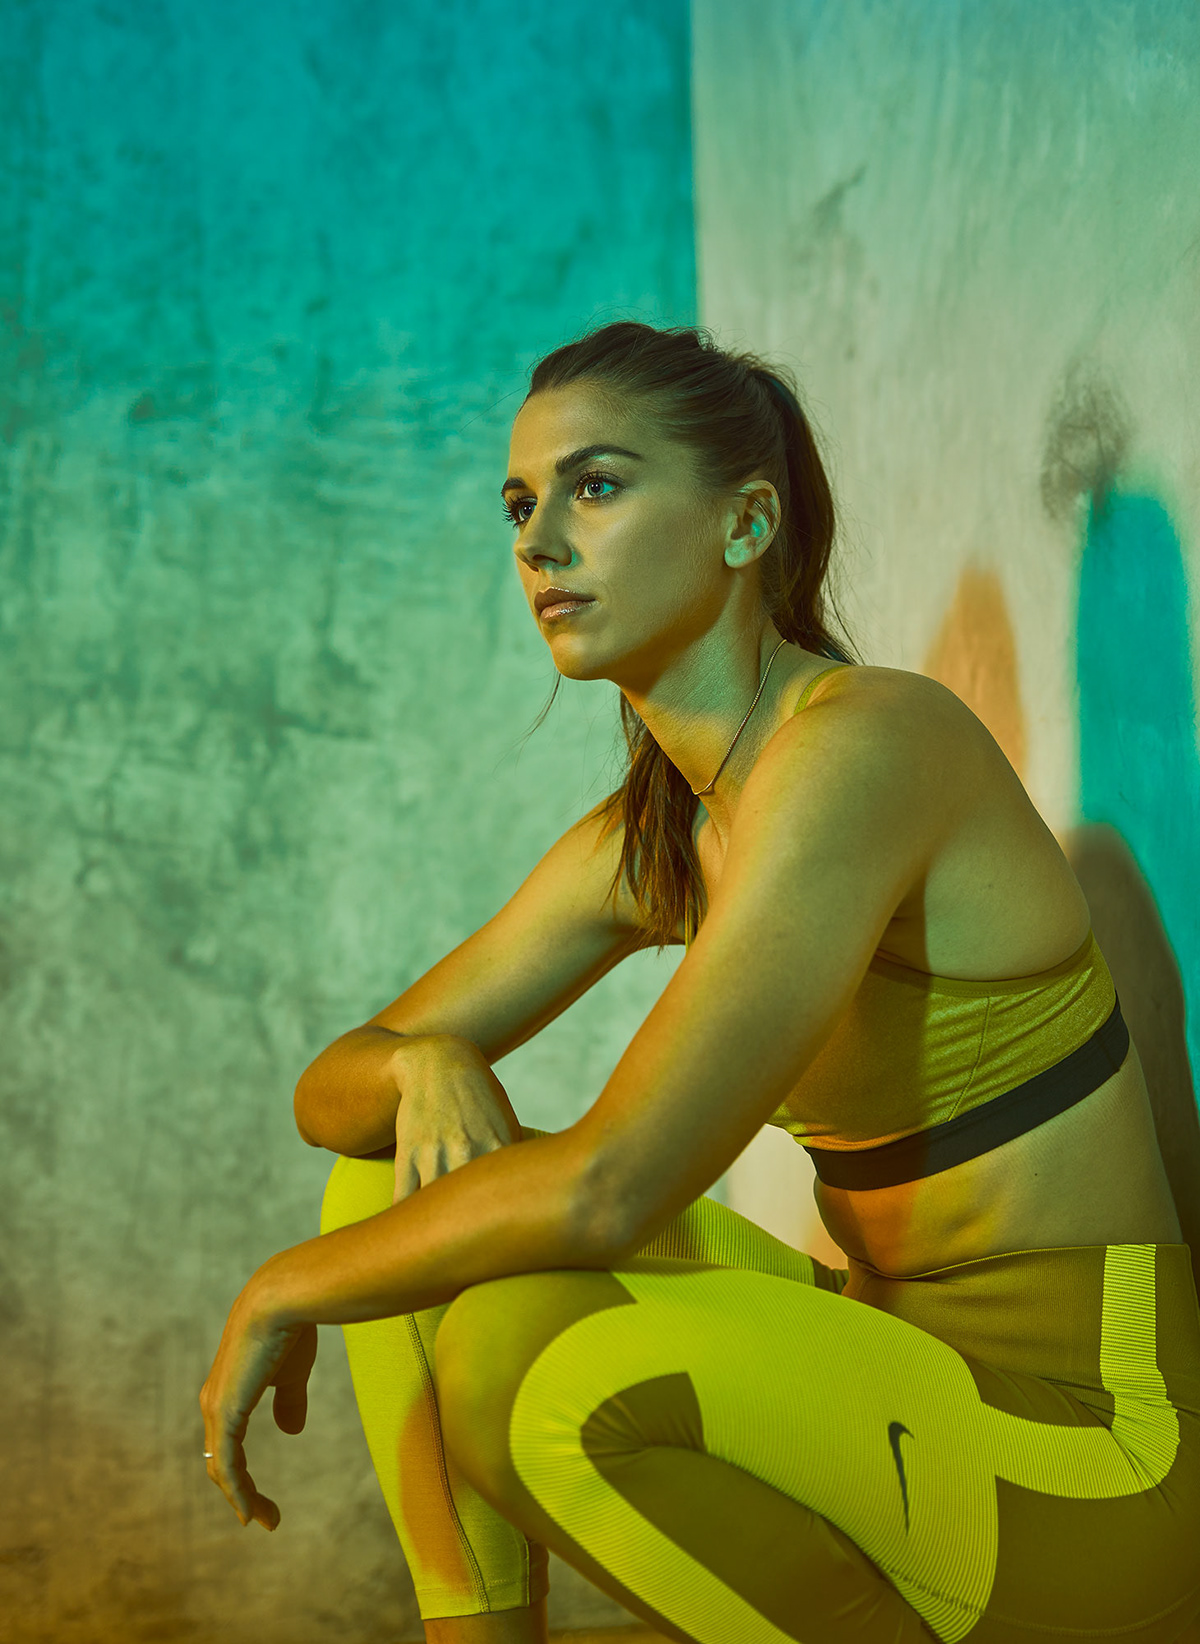 Adweek alex morgan equality magazinecover Portraiture soccer sports photography ussoccer womenssoccer WorldCup